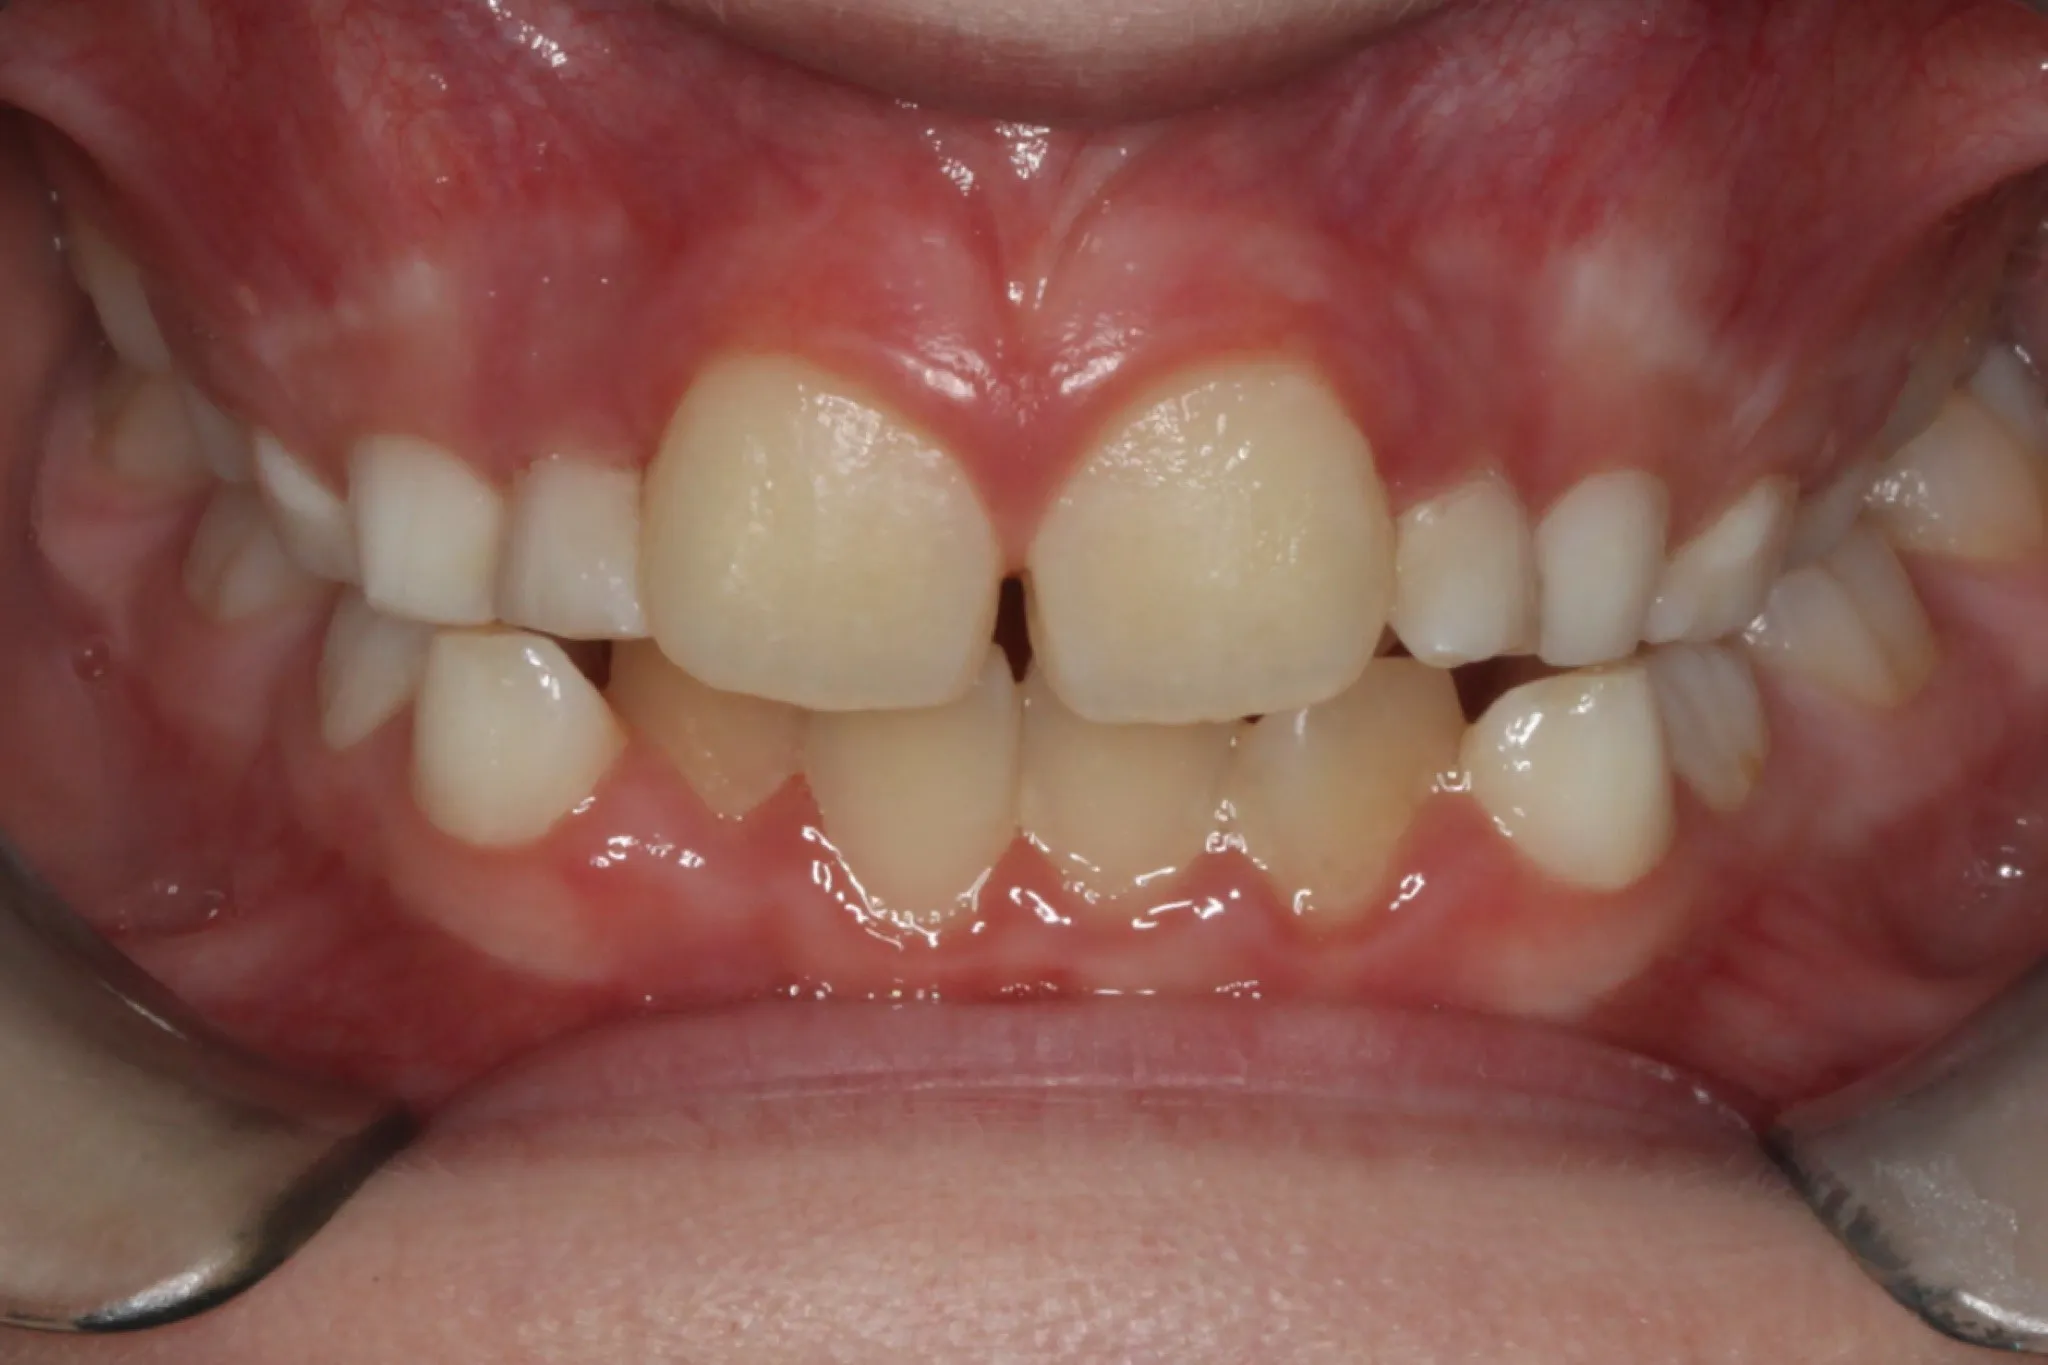 Spacing issues with gaps in upper teeth